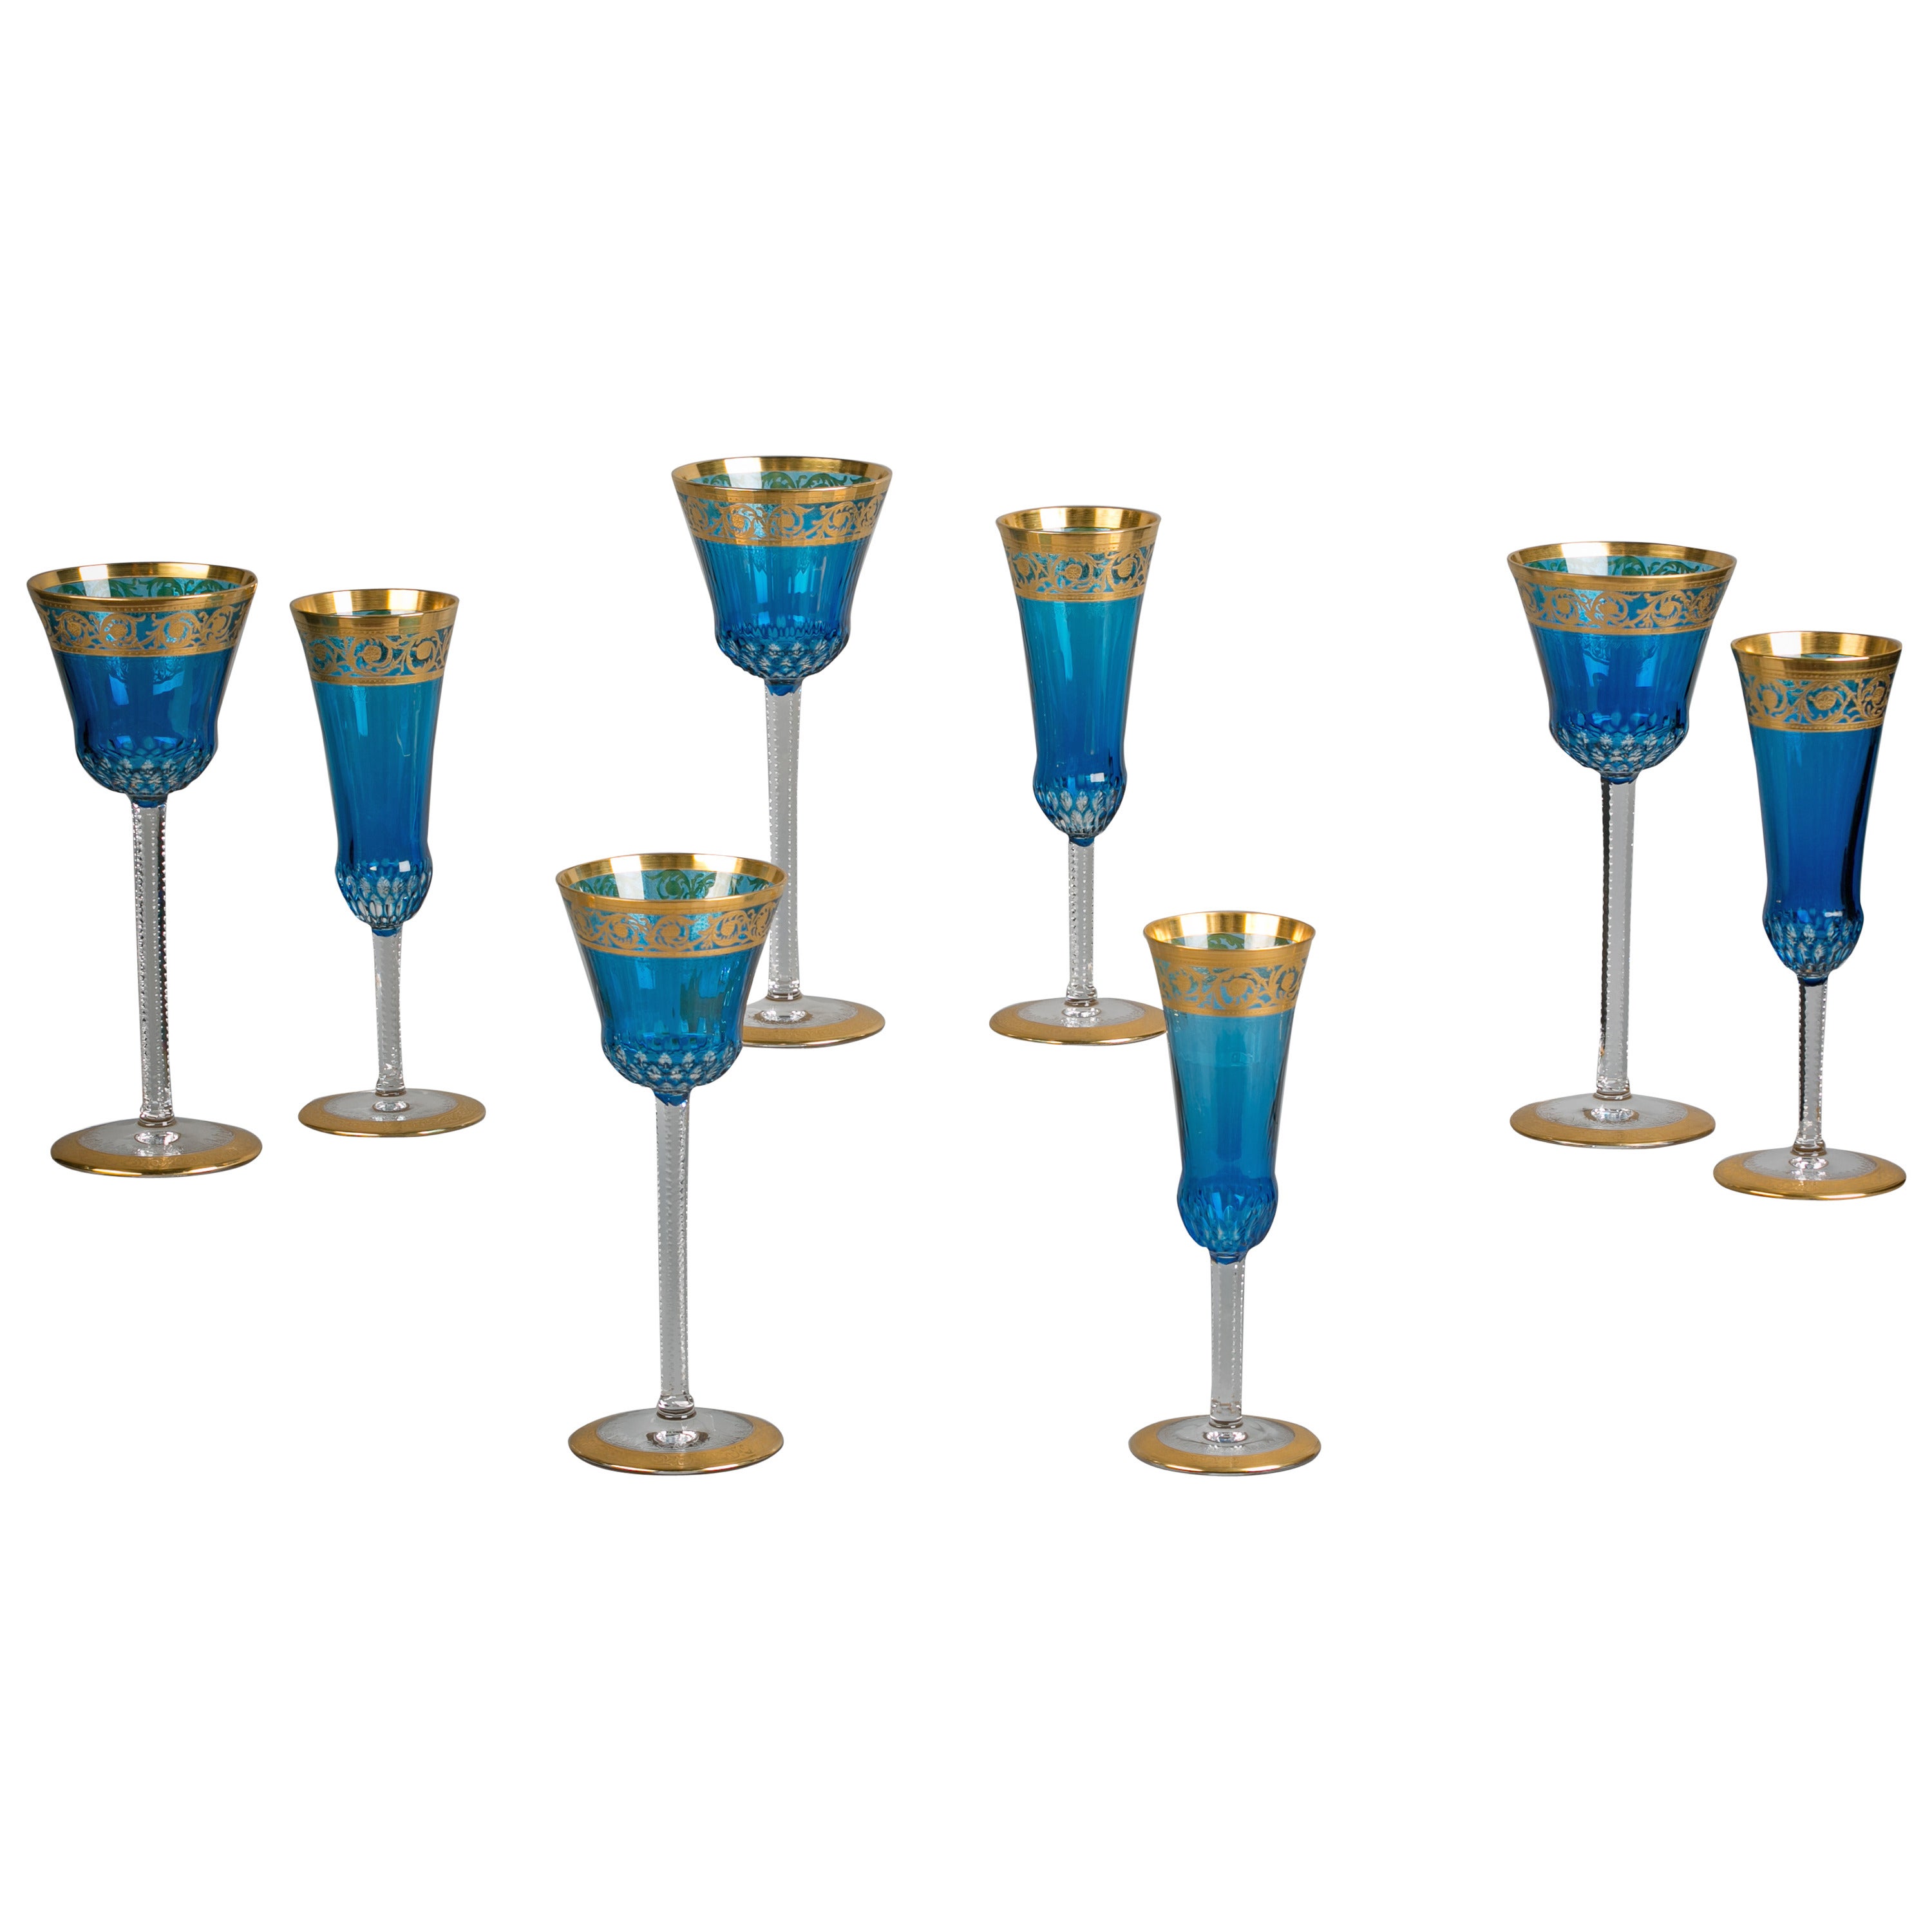 Set of 30 Wine and Champagne Glasses with French Thistle Pattern, circa 1940 For Sale